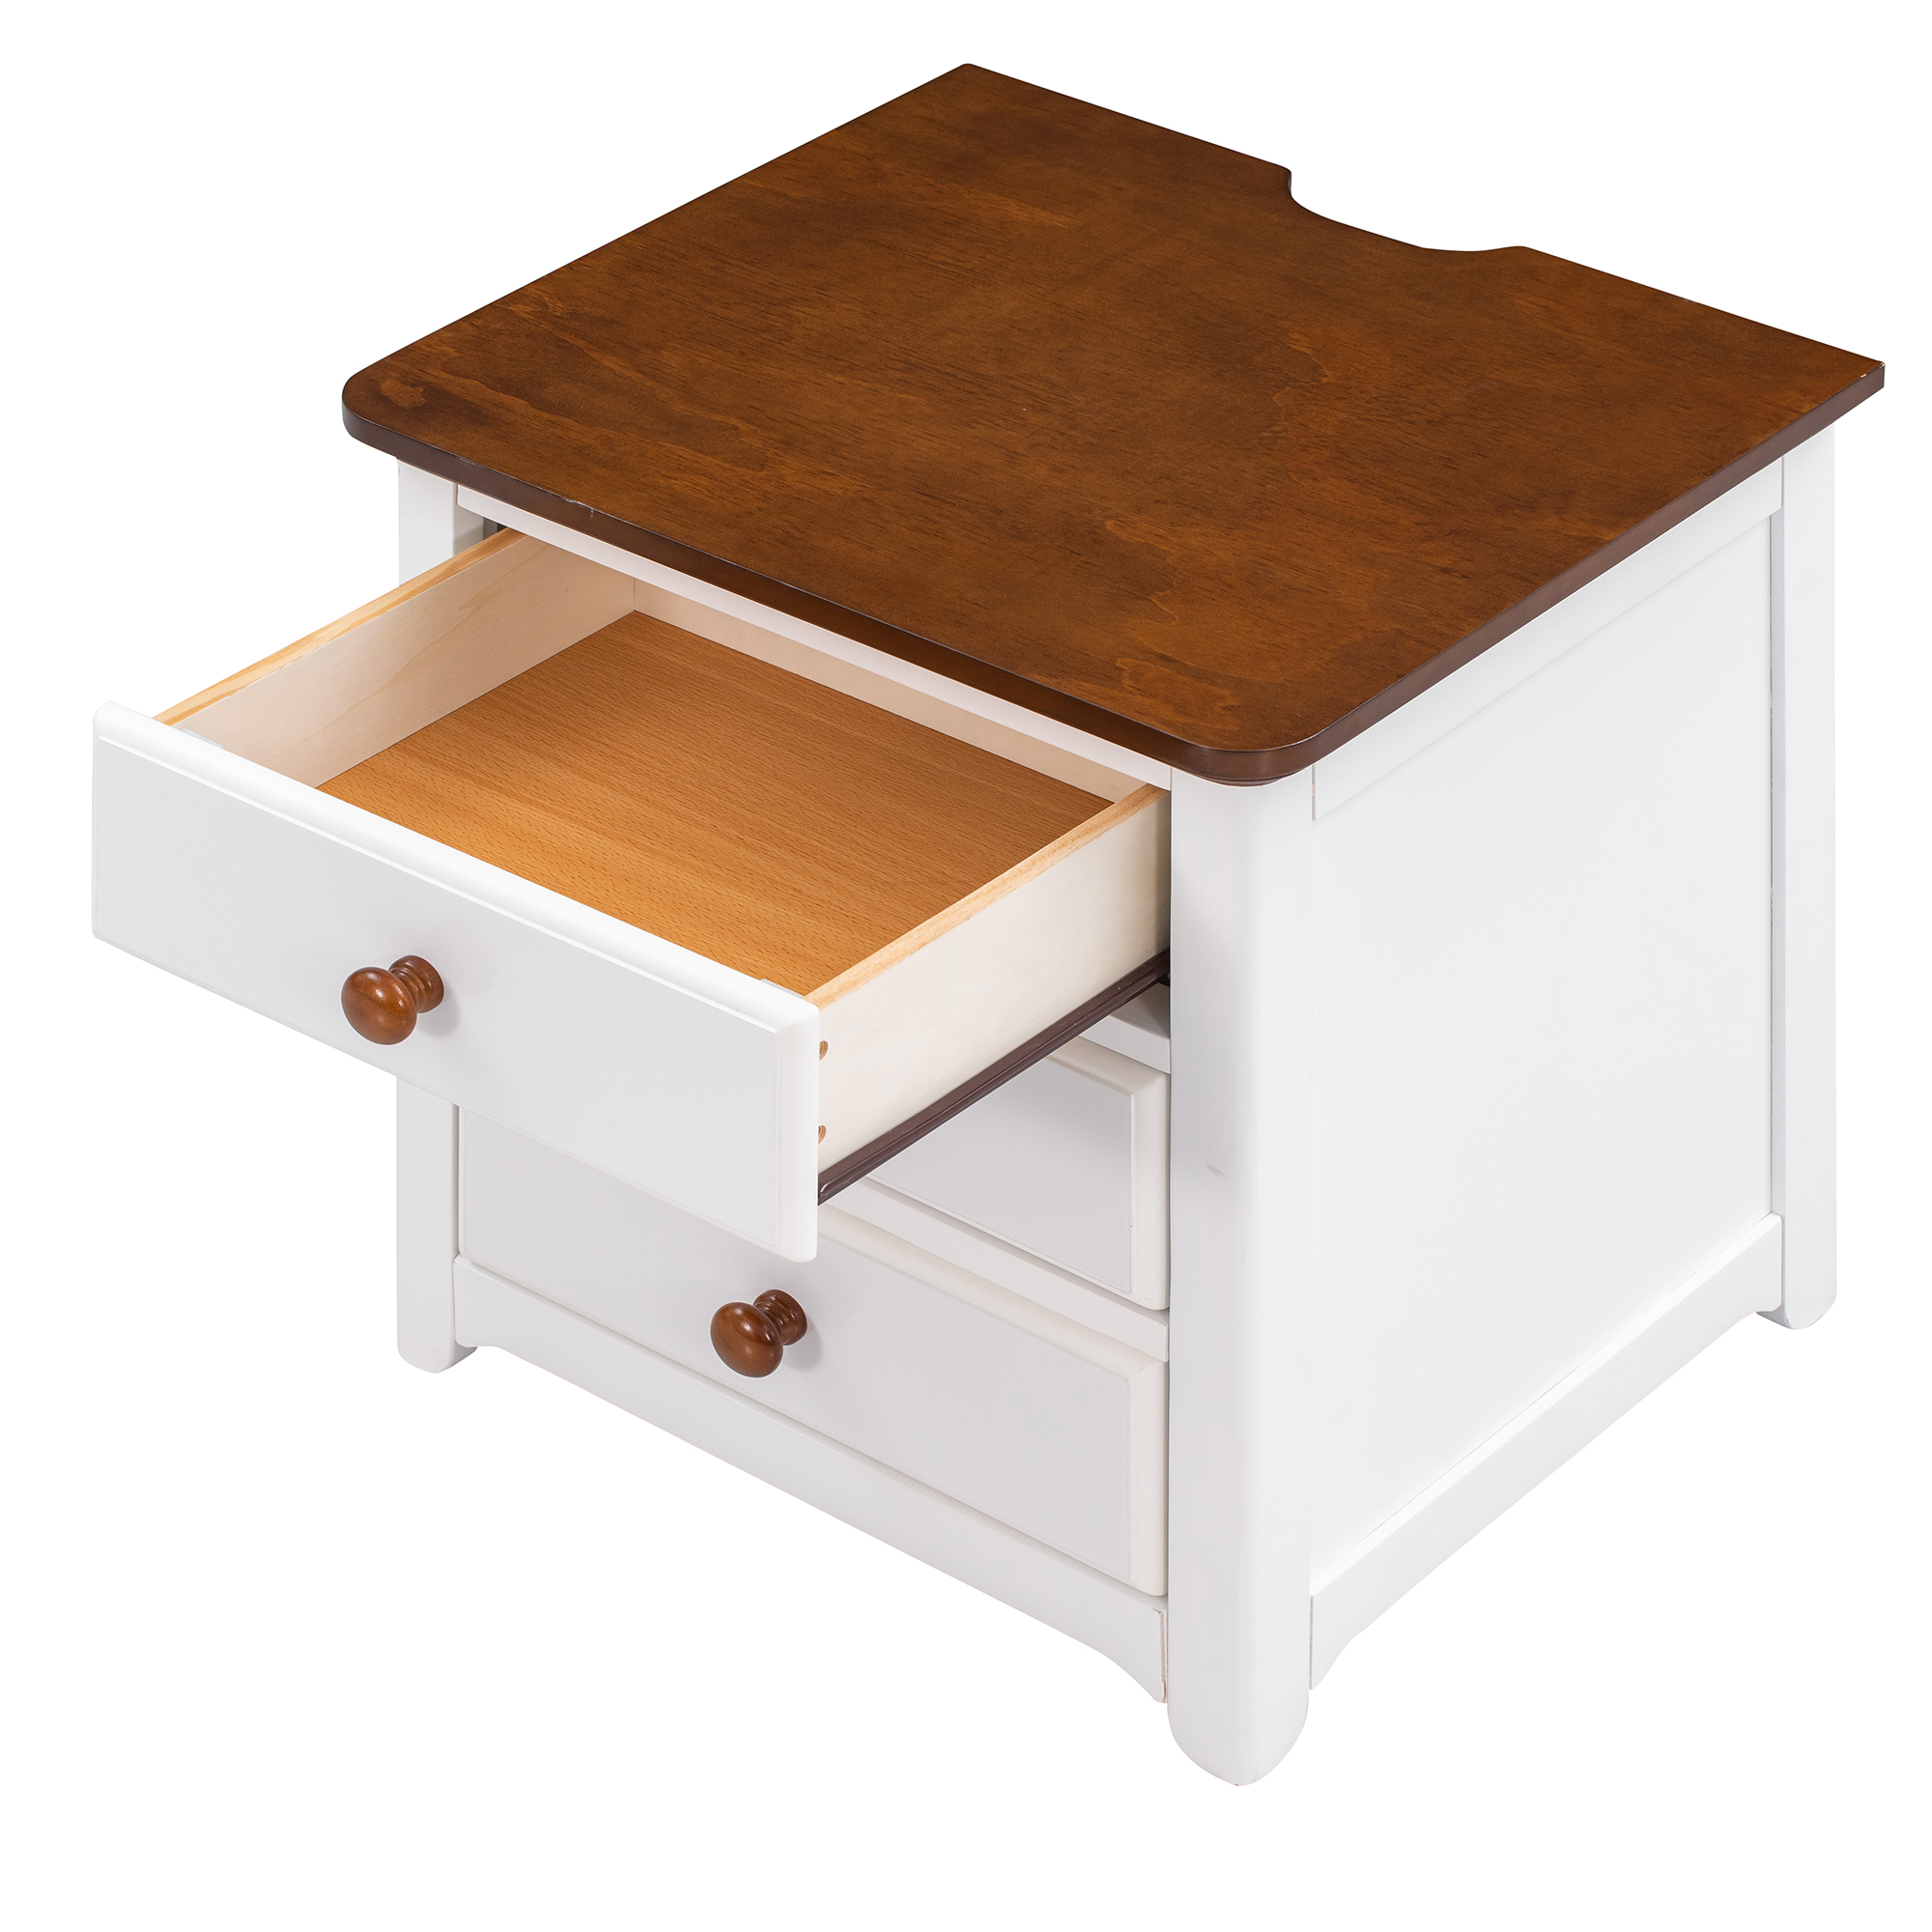 Wooden Nightstand with USB Charging Ports and Three Drawers - WF297096AAK